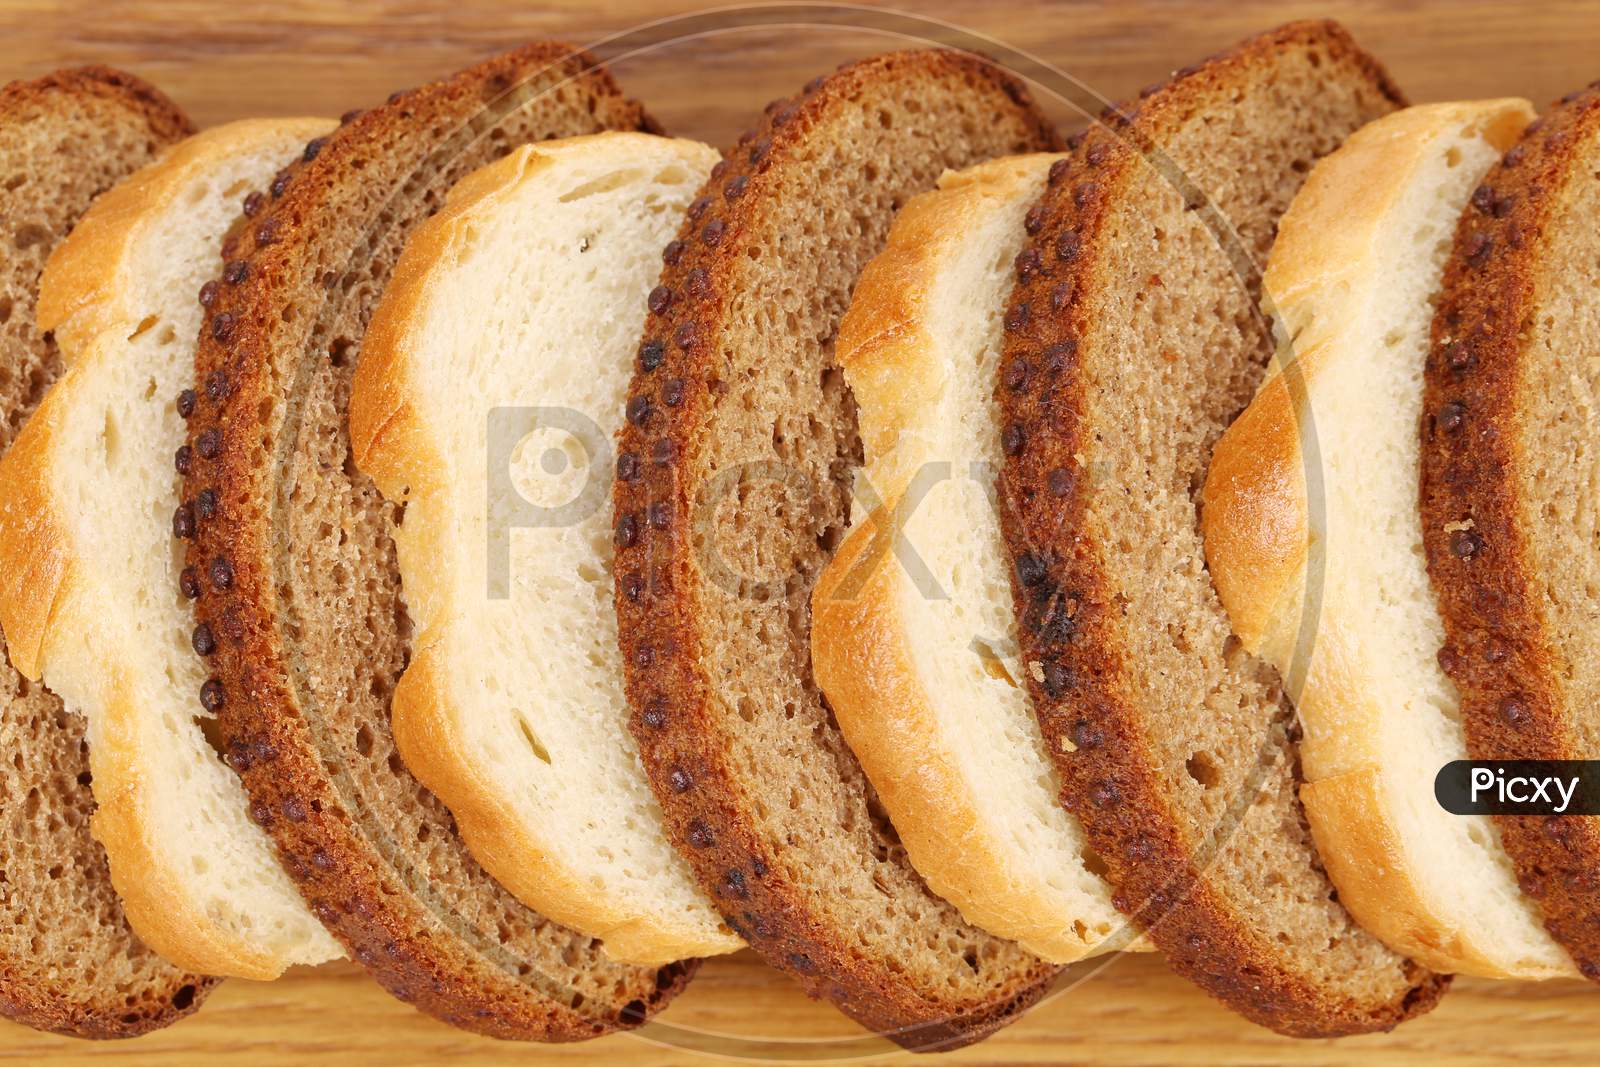 Sliced White And Brown Loaf Of Bread. Whole Background.